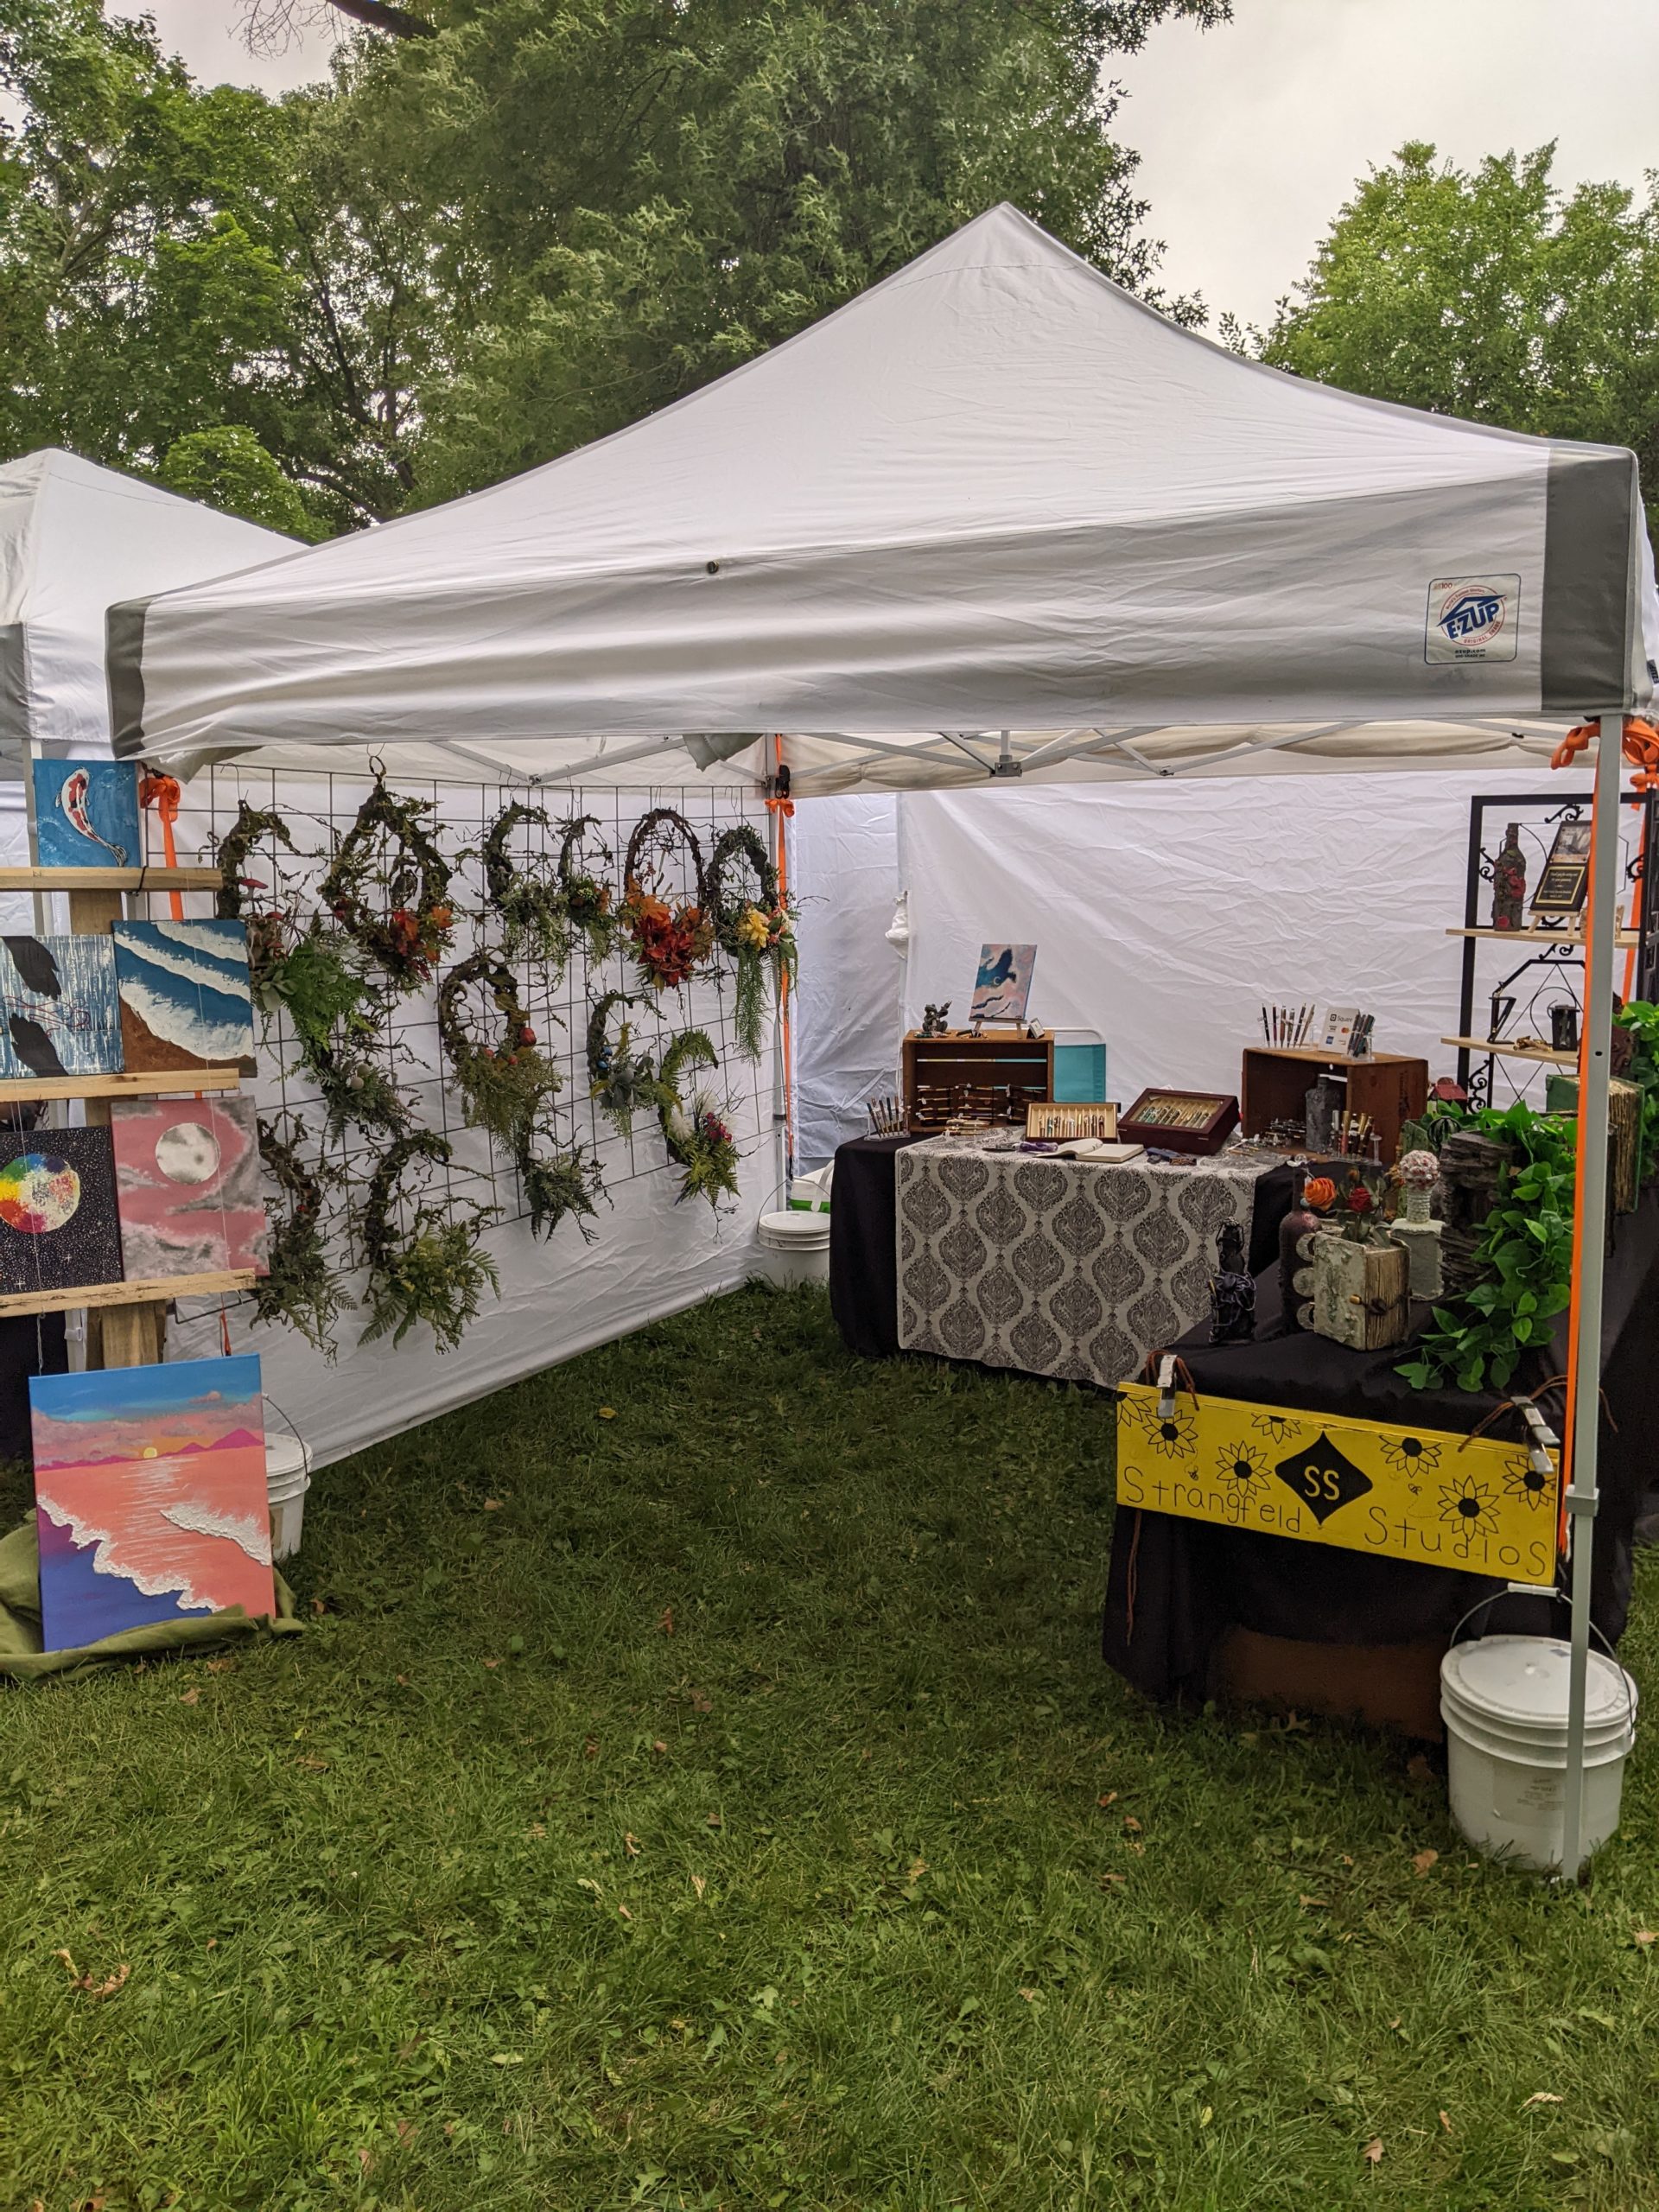 A photo of Scott and Corinne's booth at a craft fair.